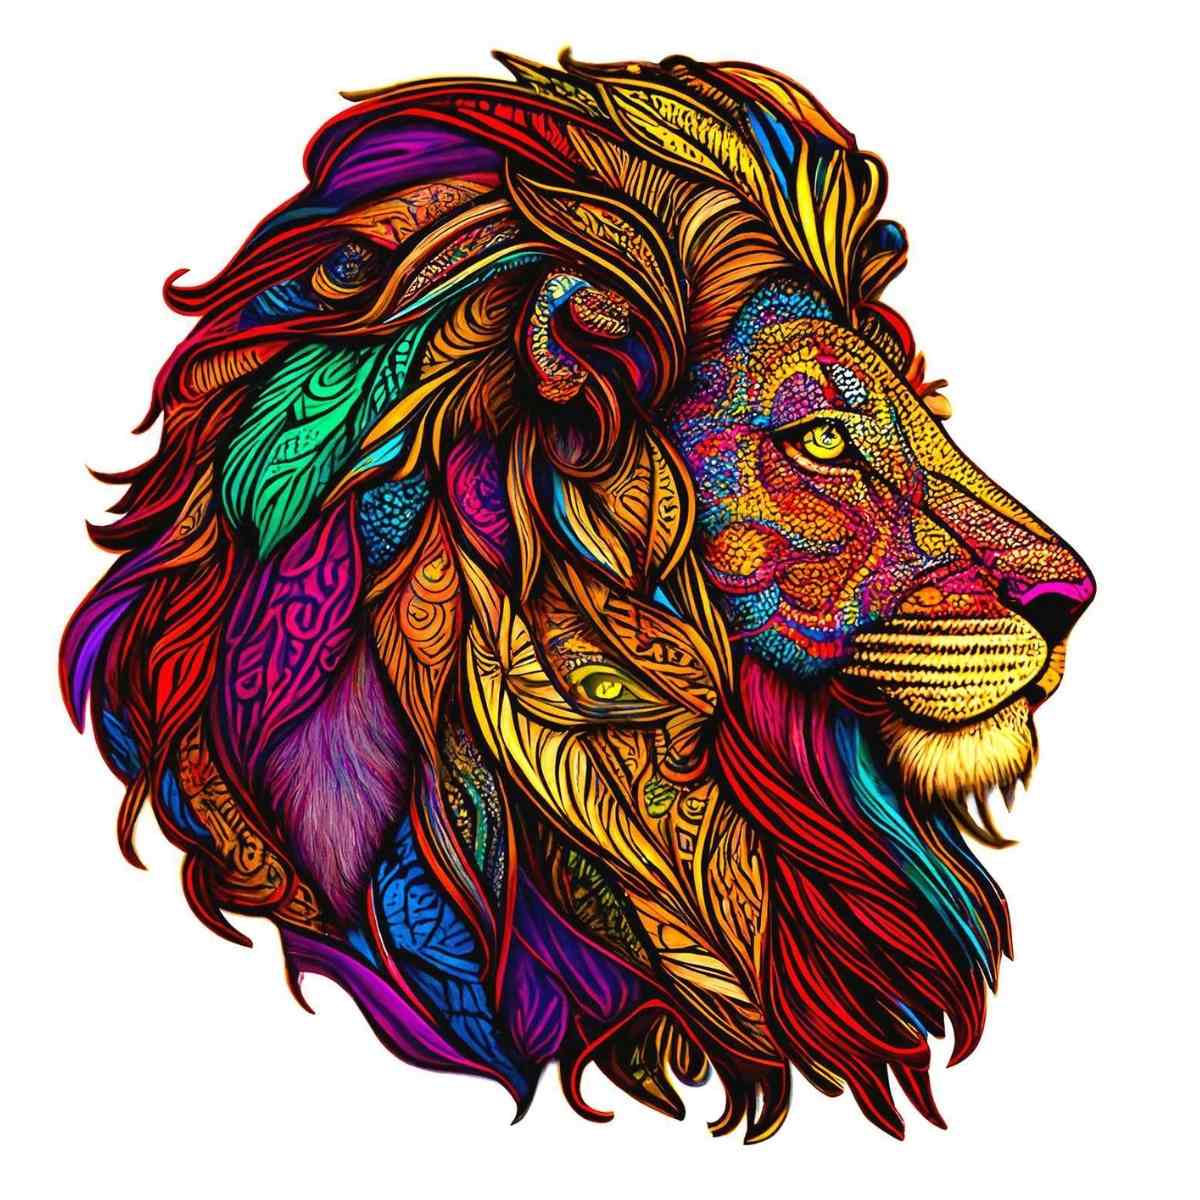 Animal Jigsaw Puzzle > Wooden Jigsaw Puzzle > Jigsaw Puzzle A5 Majestic Lion - Jigsaw Puzzle